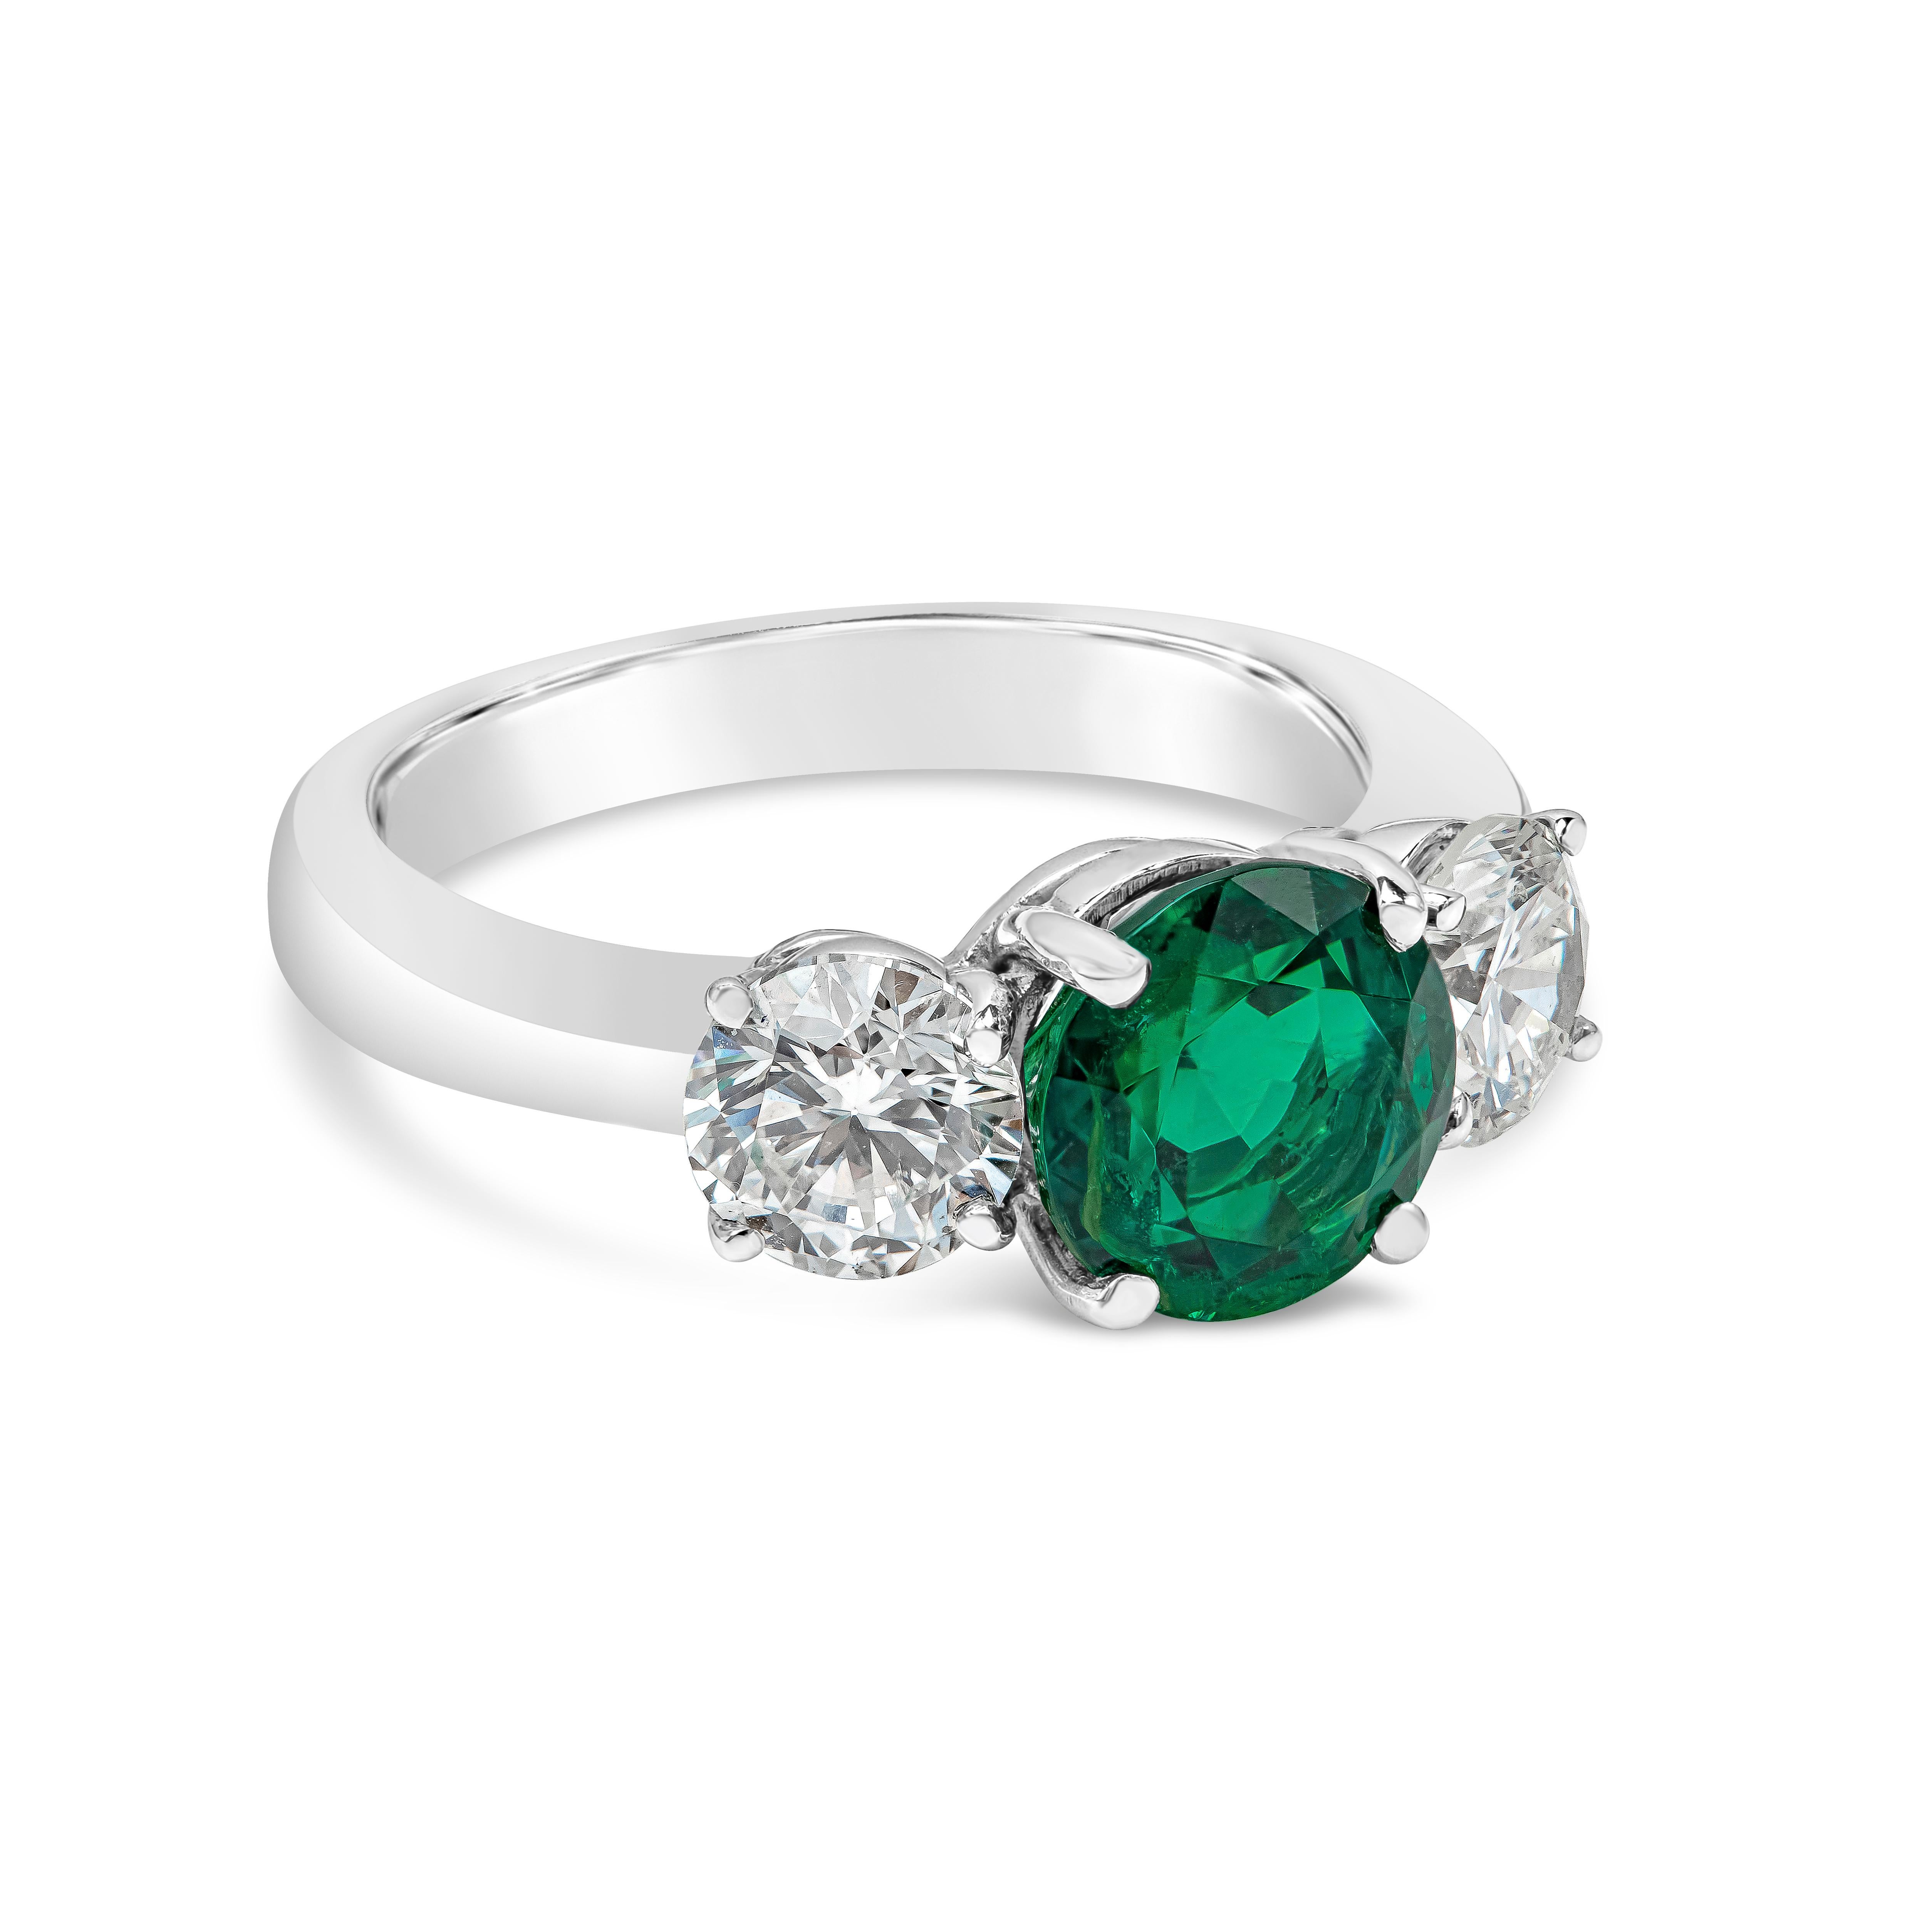 Elegantly made three stone engagement ring showcasing a rare vibrant green emerald weighing 1.87 carats and is certified by GIA as Russian origin. Flanking the center gemstone are two round brilliant diamonds weighing 1.30 carats total, G-H color